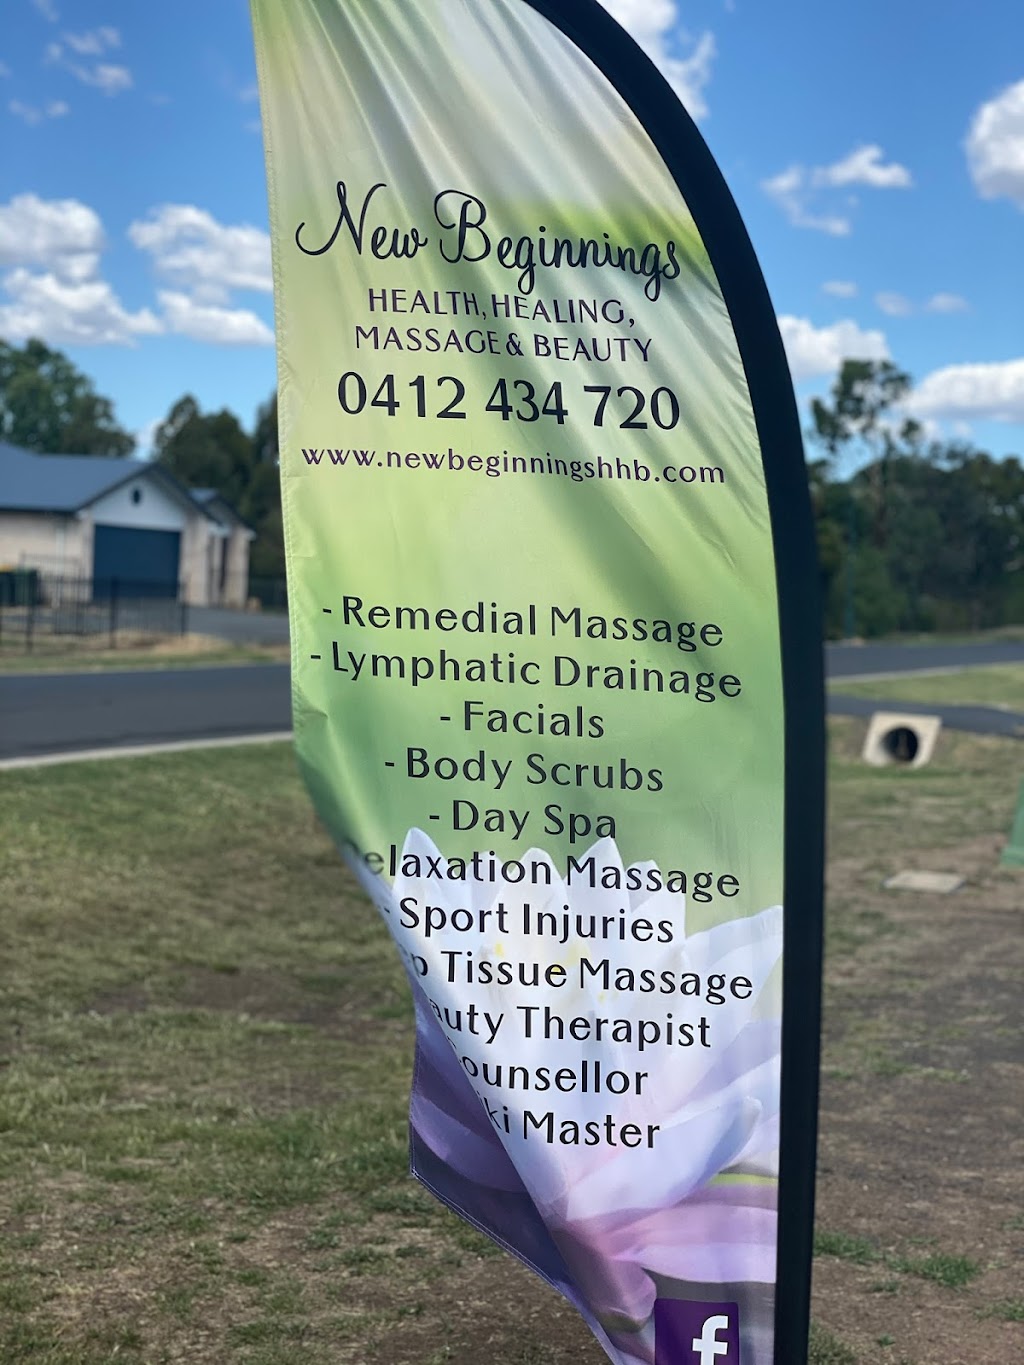 New Beginnings Massage Therapy Dalby |  | 20 Vanessa Dr, Dalby QLD 4405, Australia | 0412434720 OR +61 412 434 720